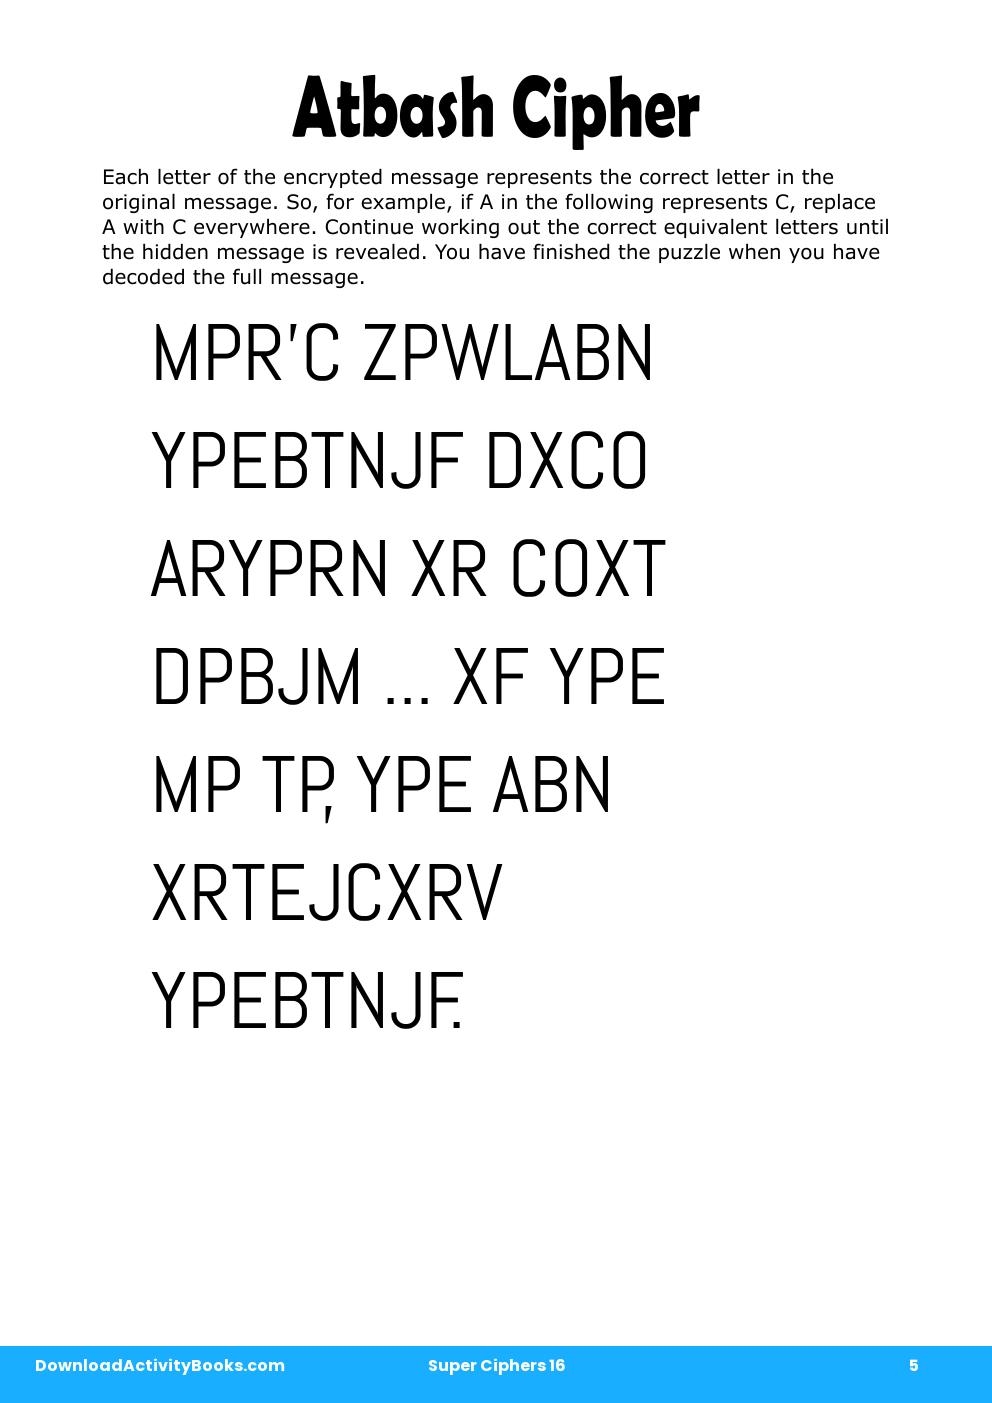 Atbash Cipher in Super Ciphers 16